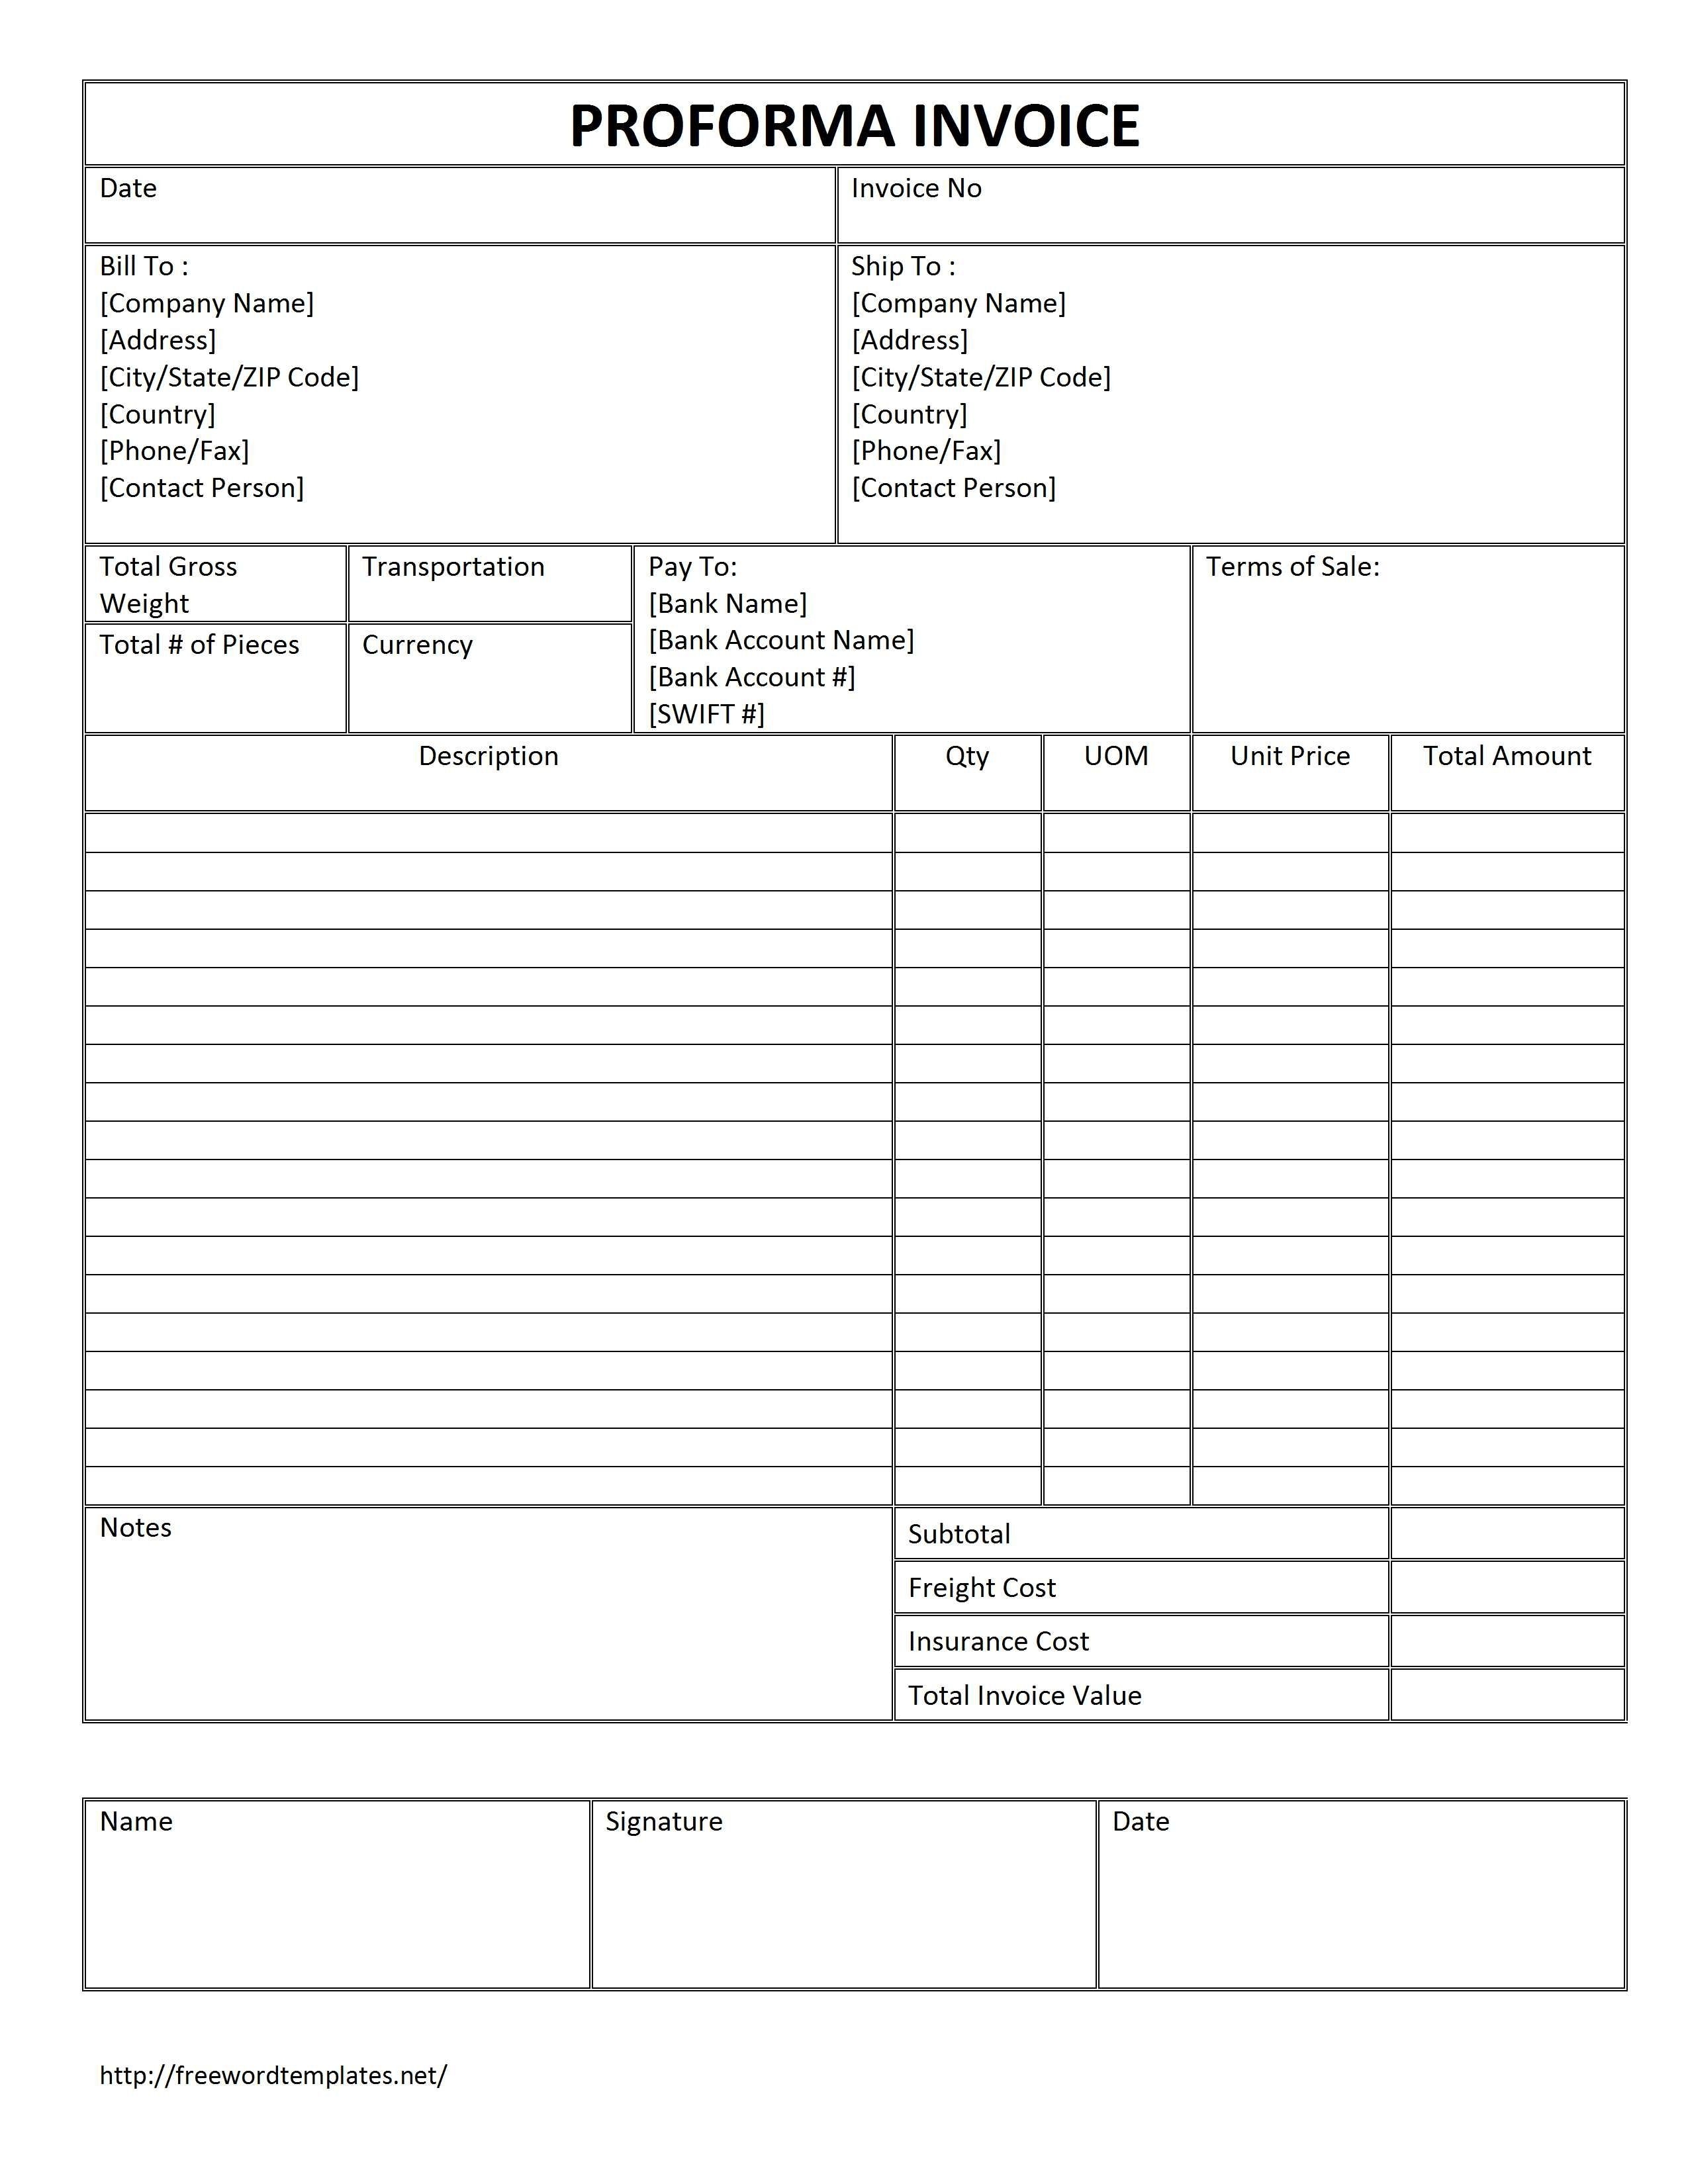 definition proforma invoice invoice template free 2016 what's the meaning of invoice